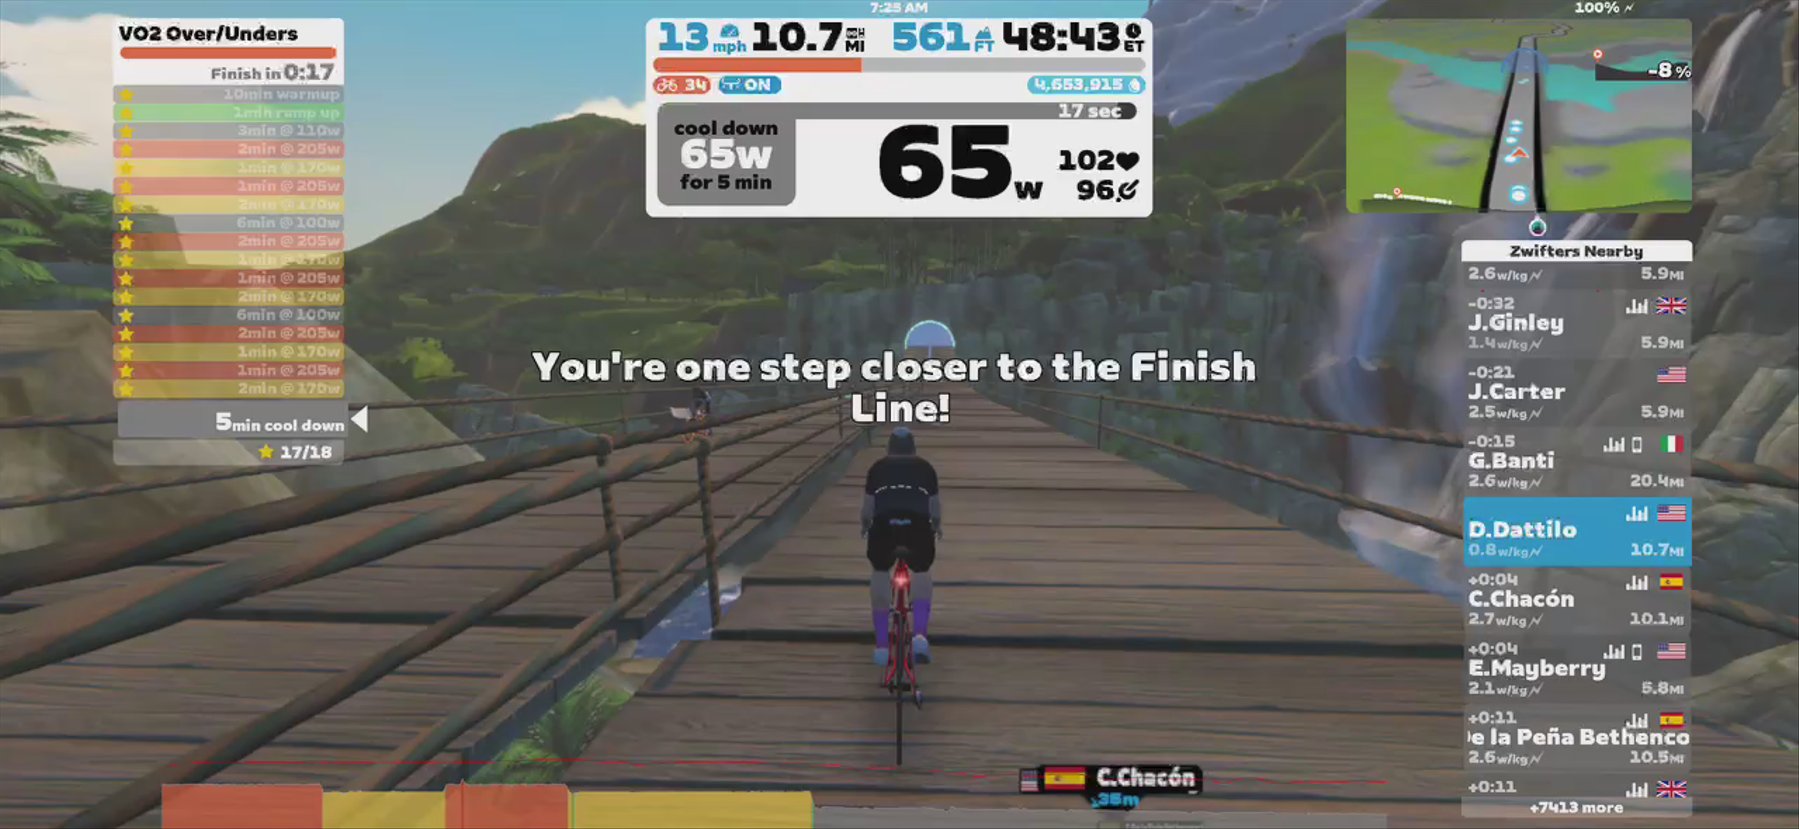 Zwift - Zwift Academy Road: Workout 1 | VO2 Over/Unders in Watopia